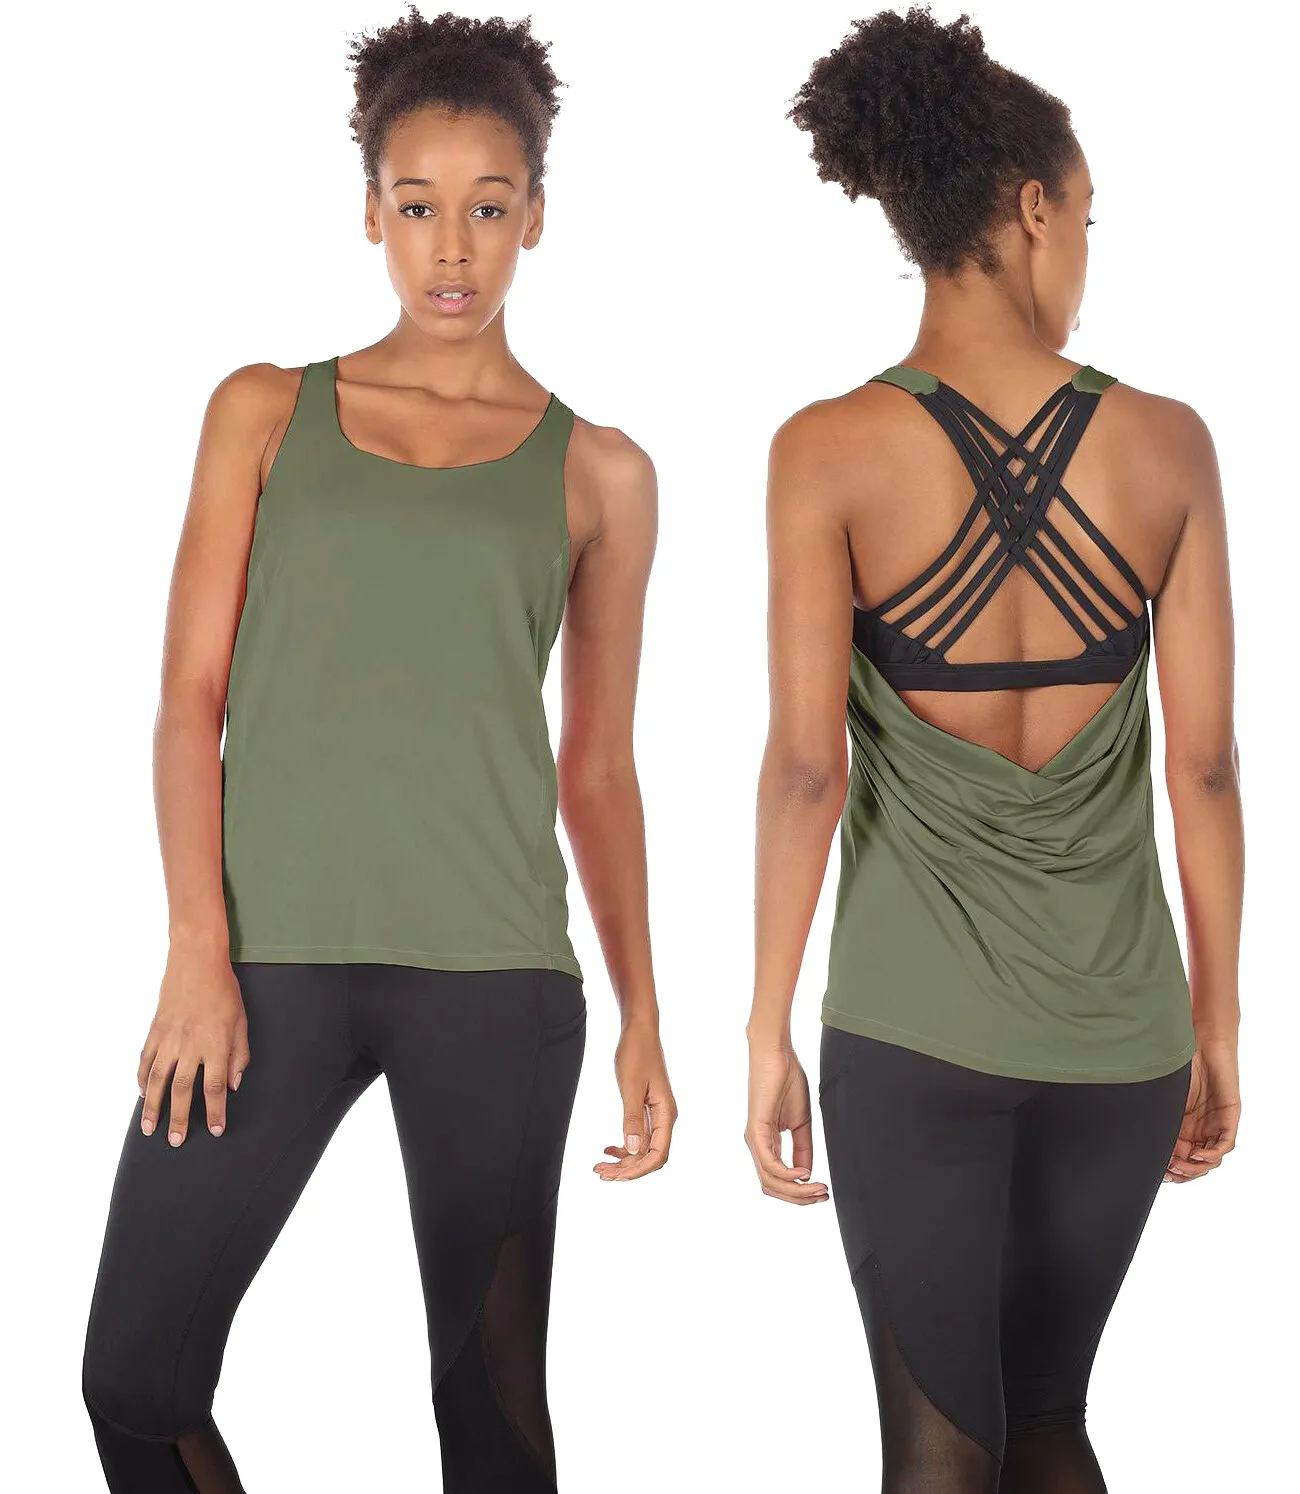 

Women Yoga Tops Vest Fitness Lounging Jogging Hiking s Gym s Activewear Tank Tops sports workout